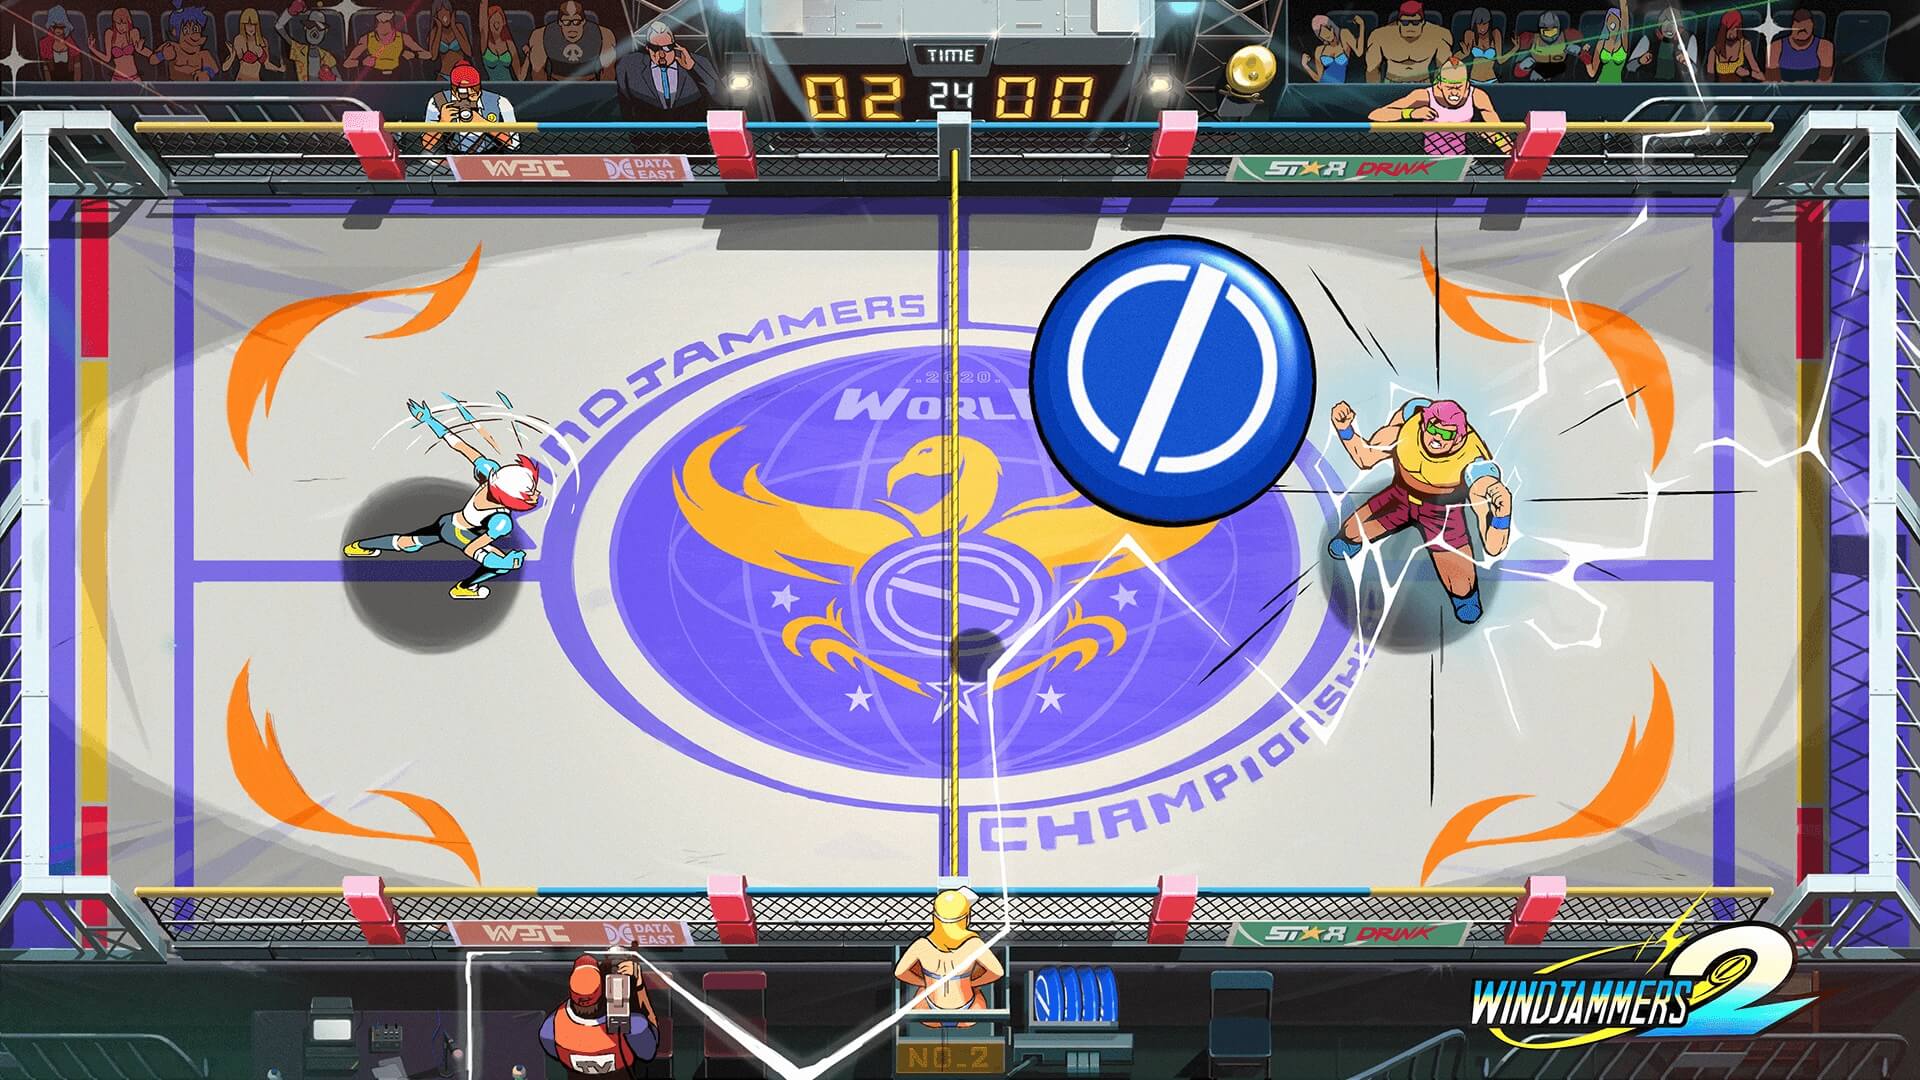 Two competitors prepare for battle in Windjammers 2